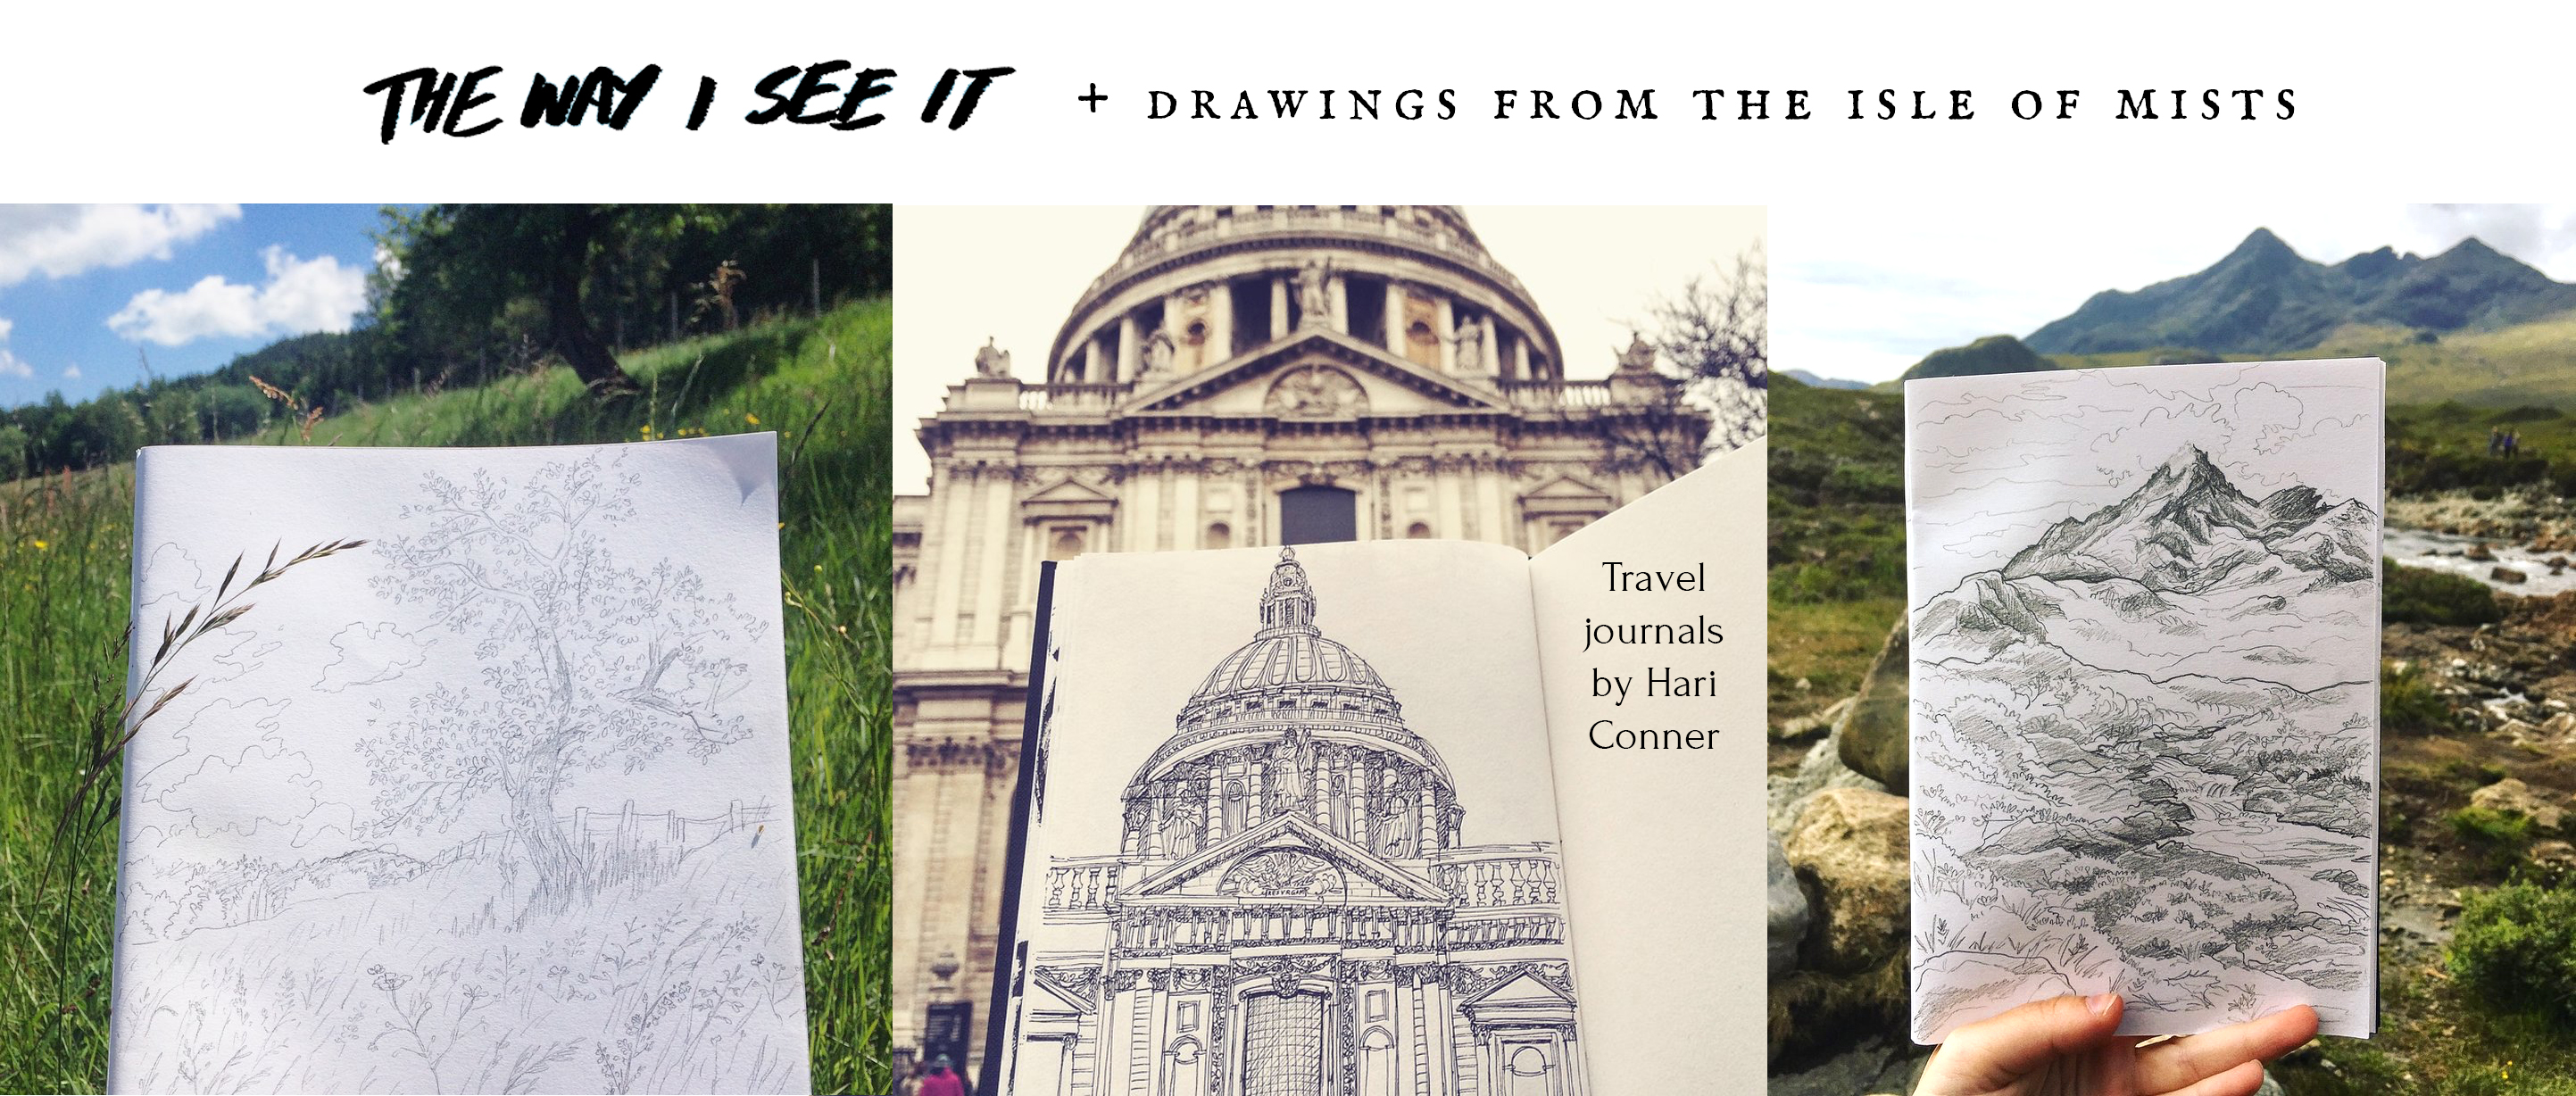 The Way I See It - artist travel sketchbooks